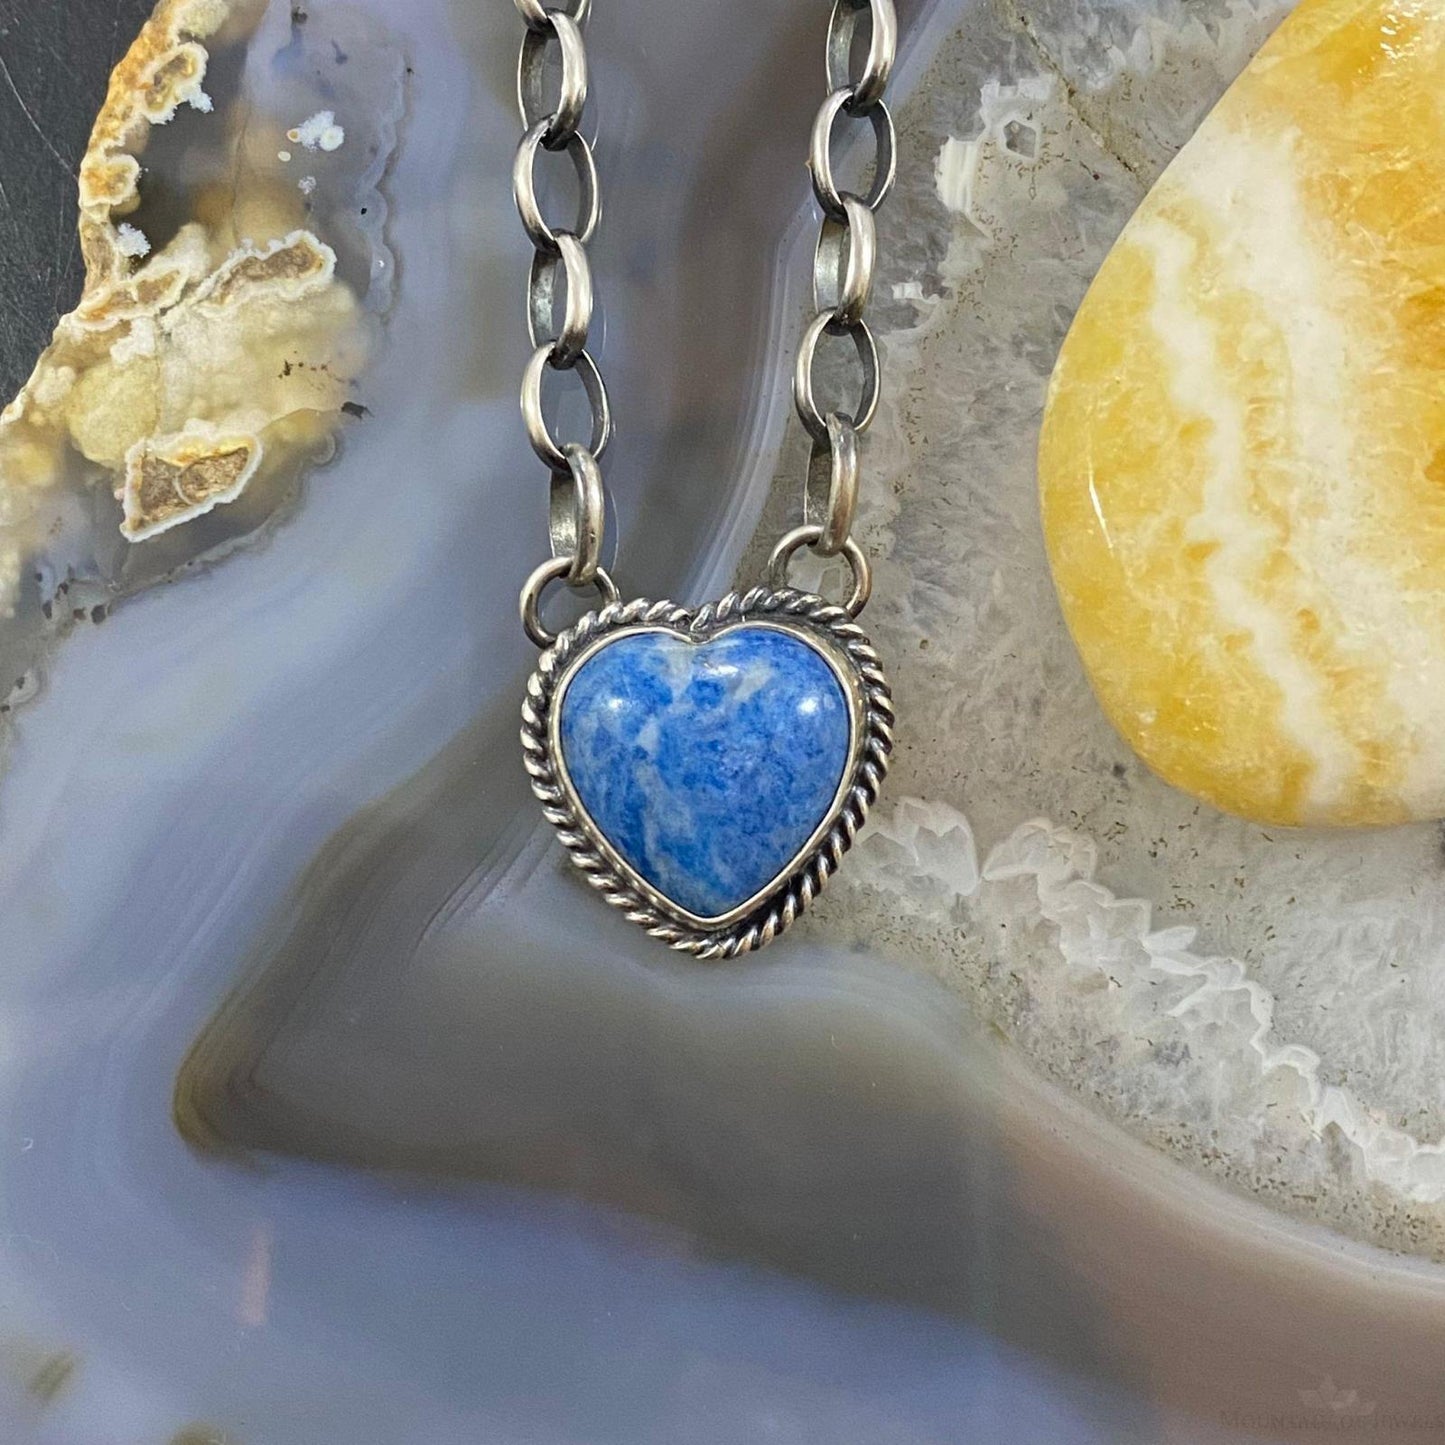 Native American Sterling Silver Denim Lapis Heart Pendant with 18" Chain